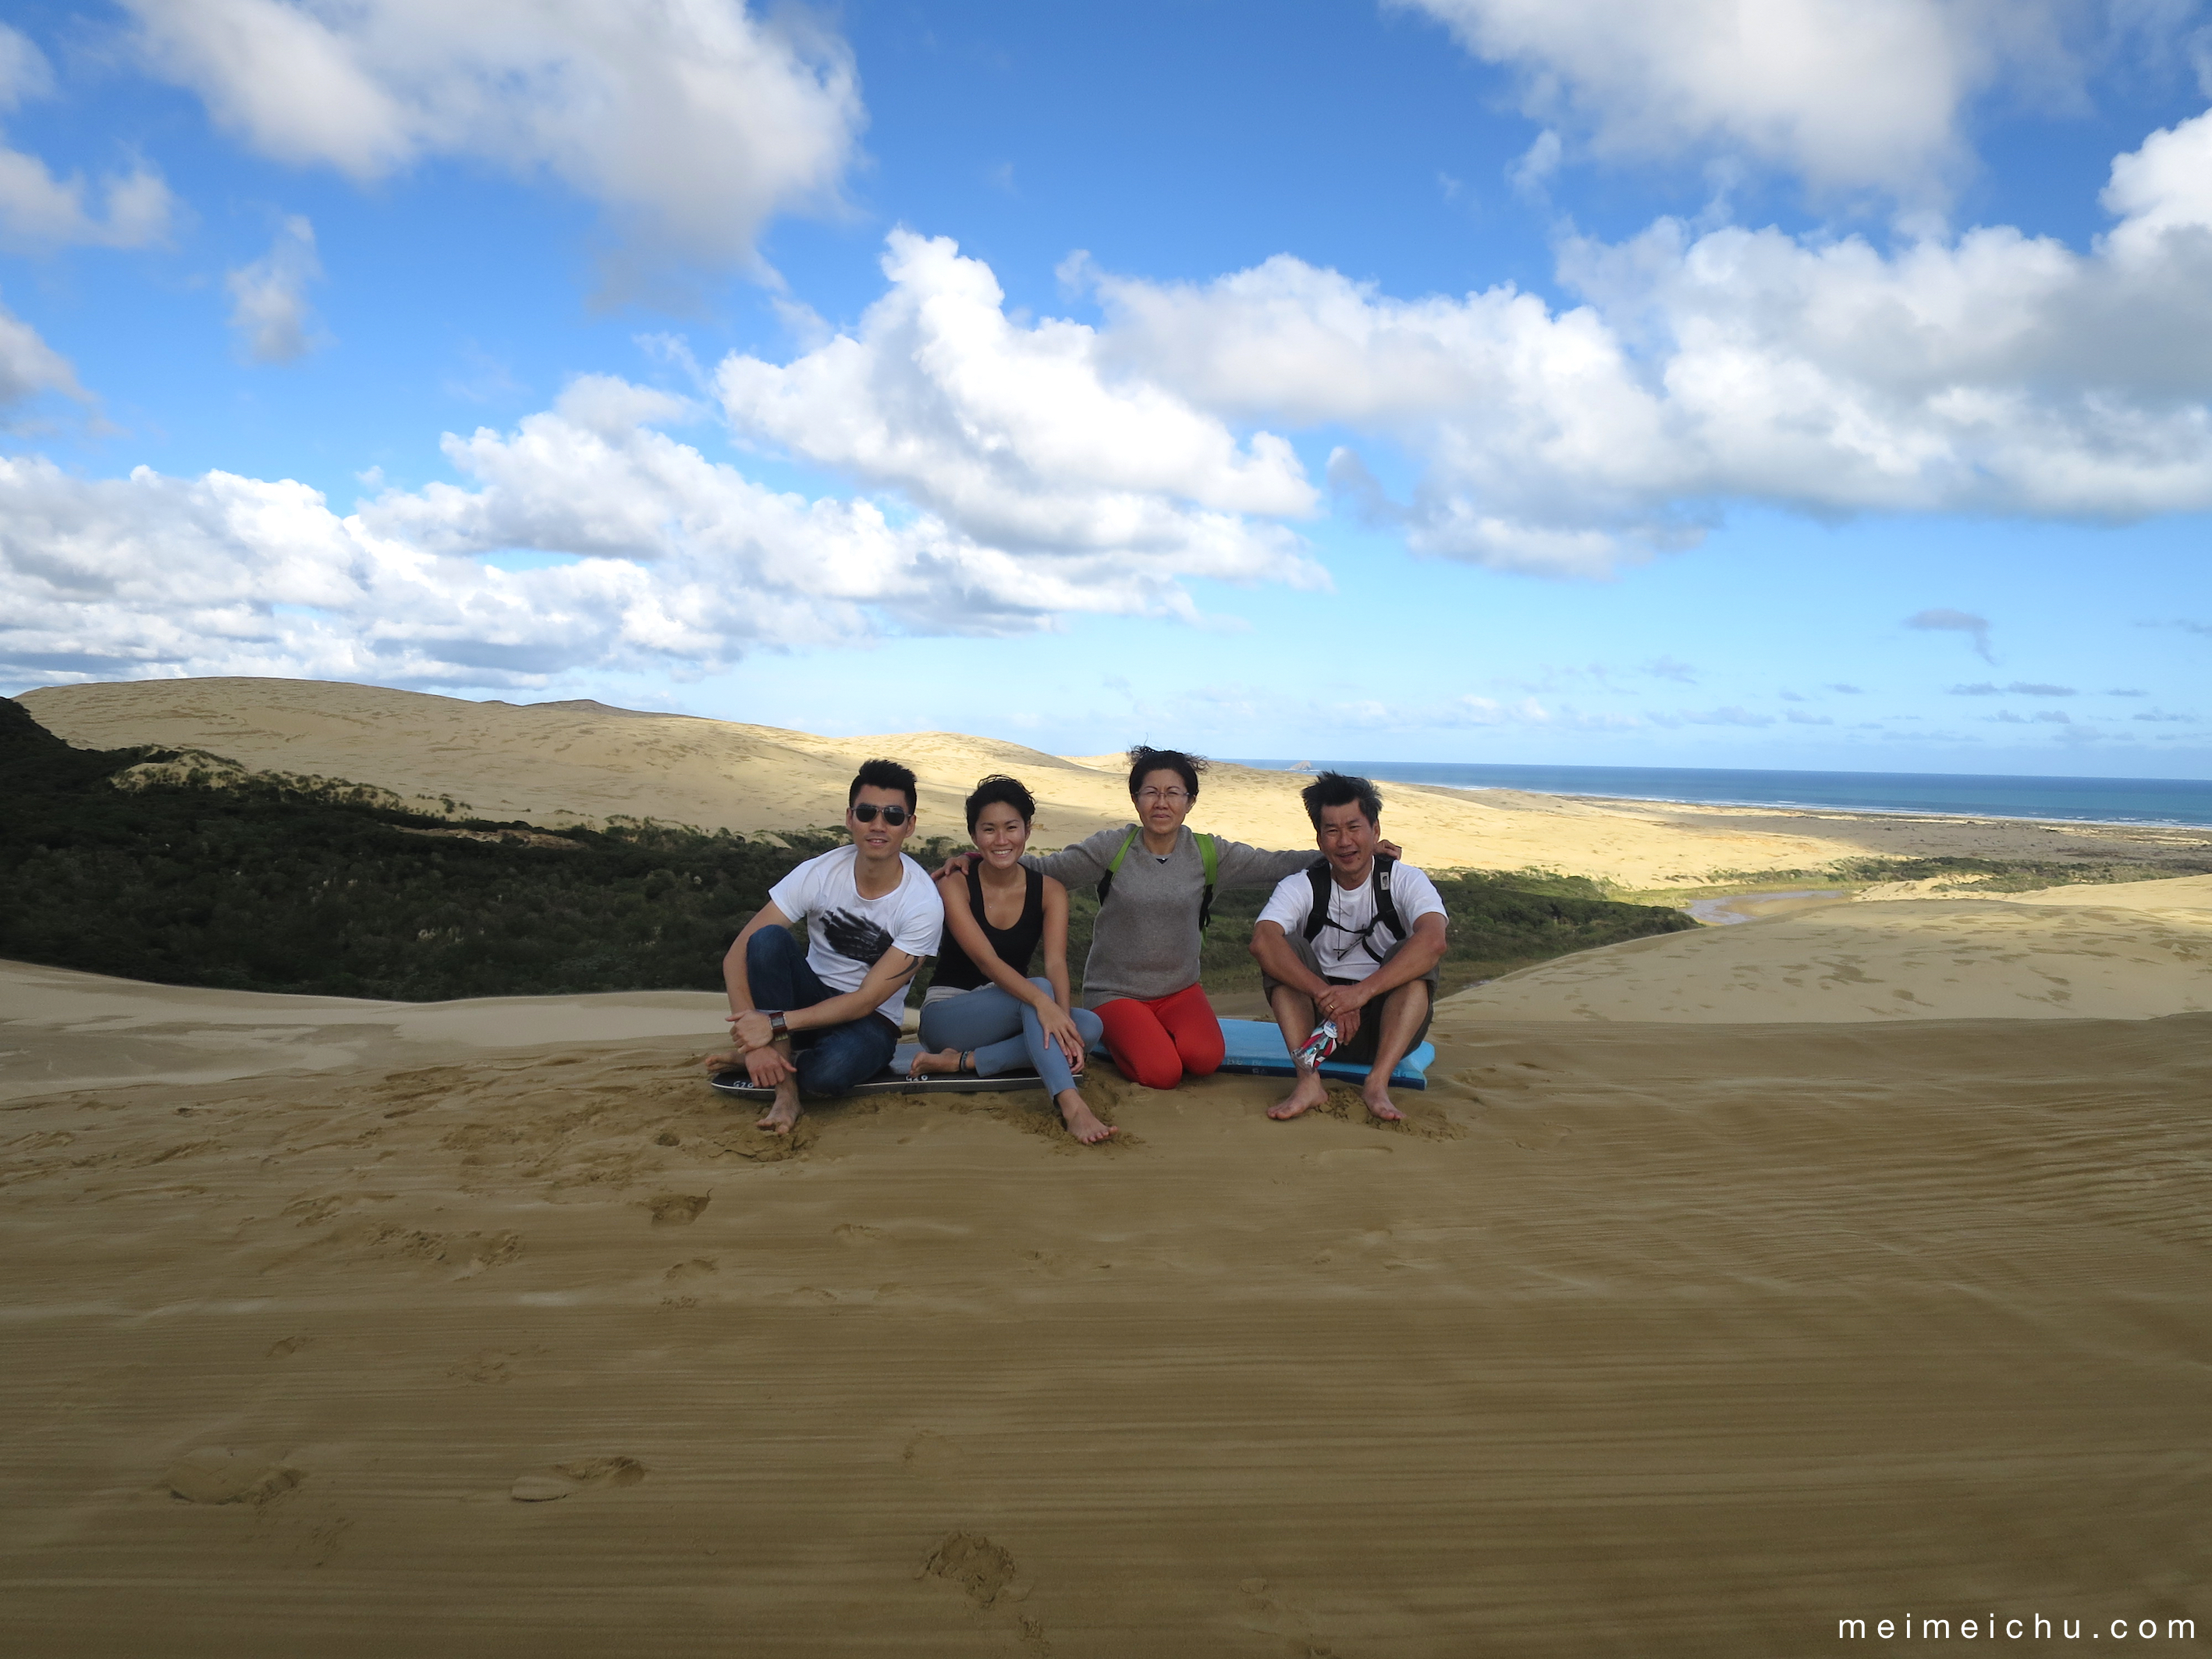 We hiked up the Te Paki sand dunes, and sand boarded down after this. 